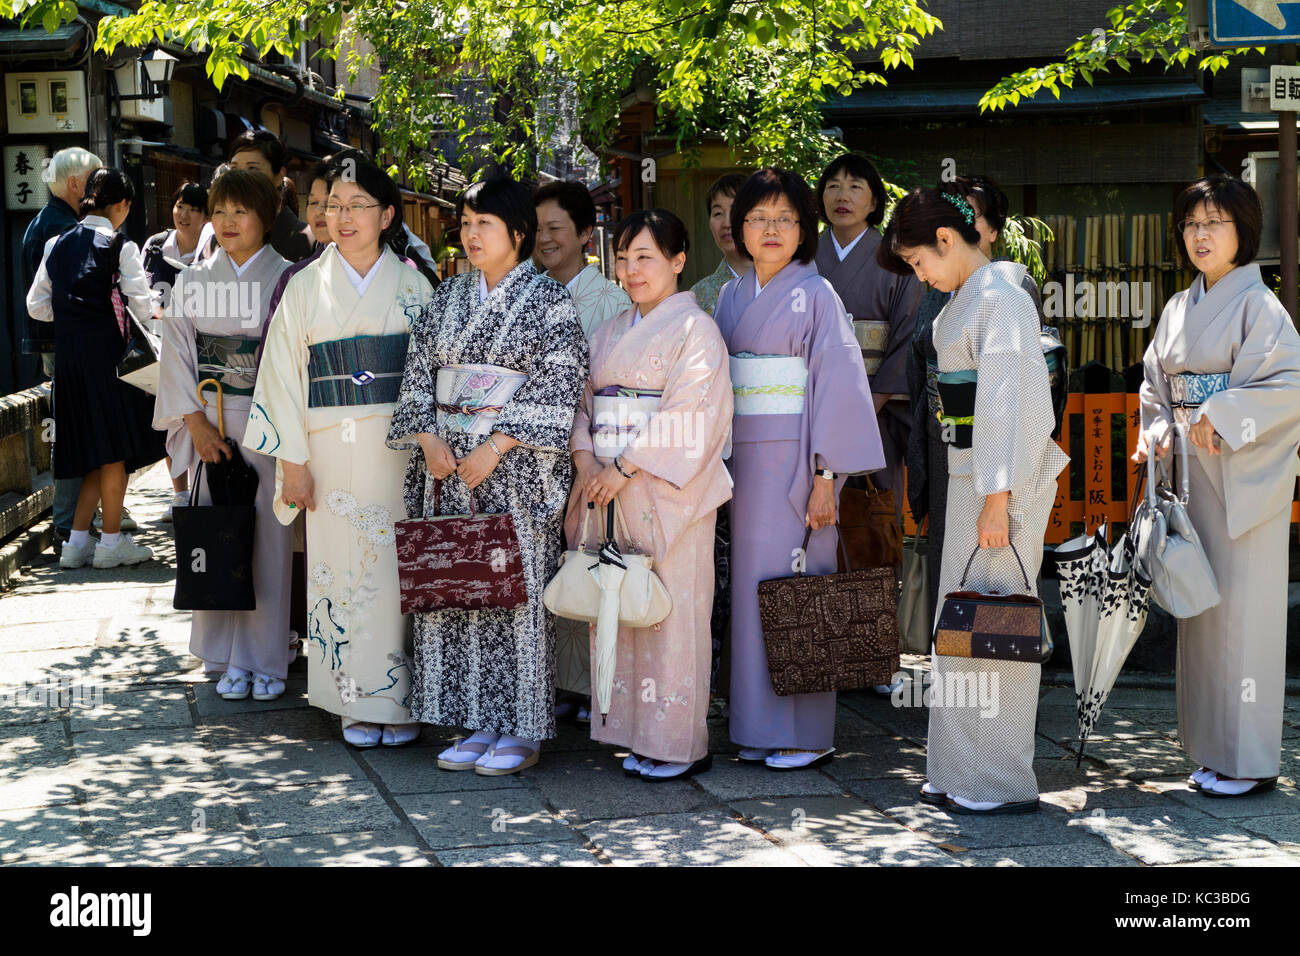 Kyoto, Japan - May 18, 2017: Group of women in kimono on a trip in Kyoto are posing for a picture Stock Photo